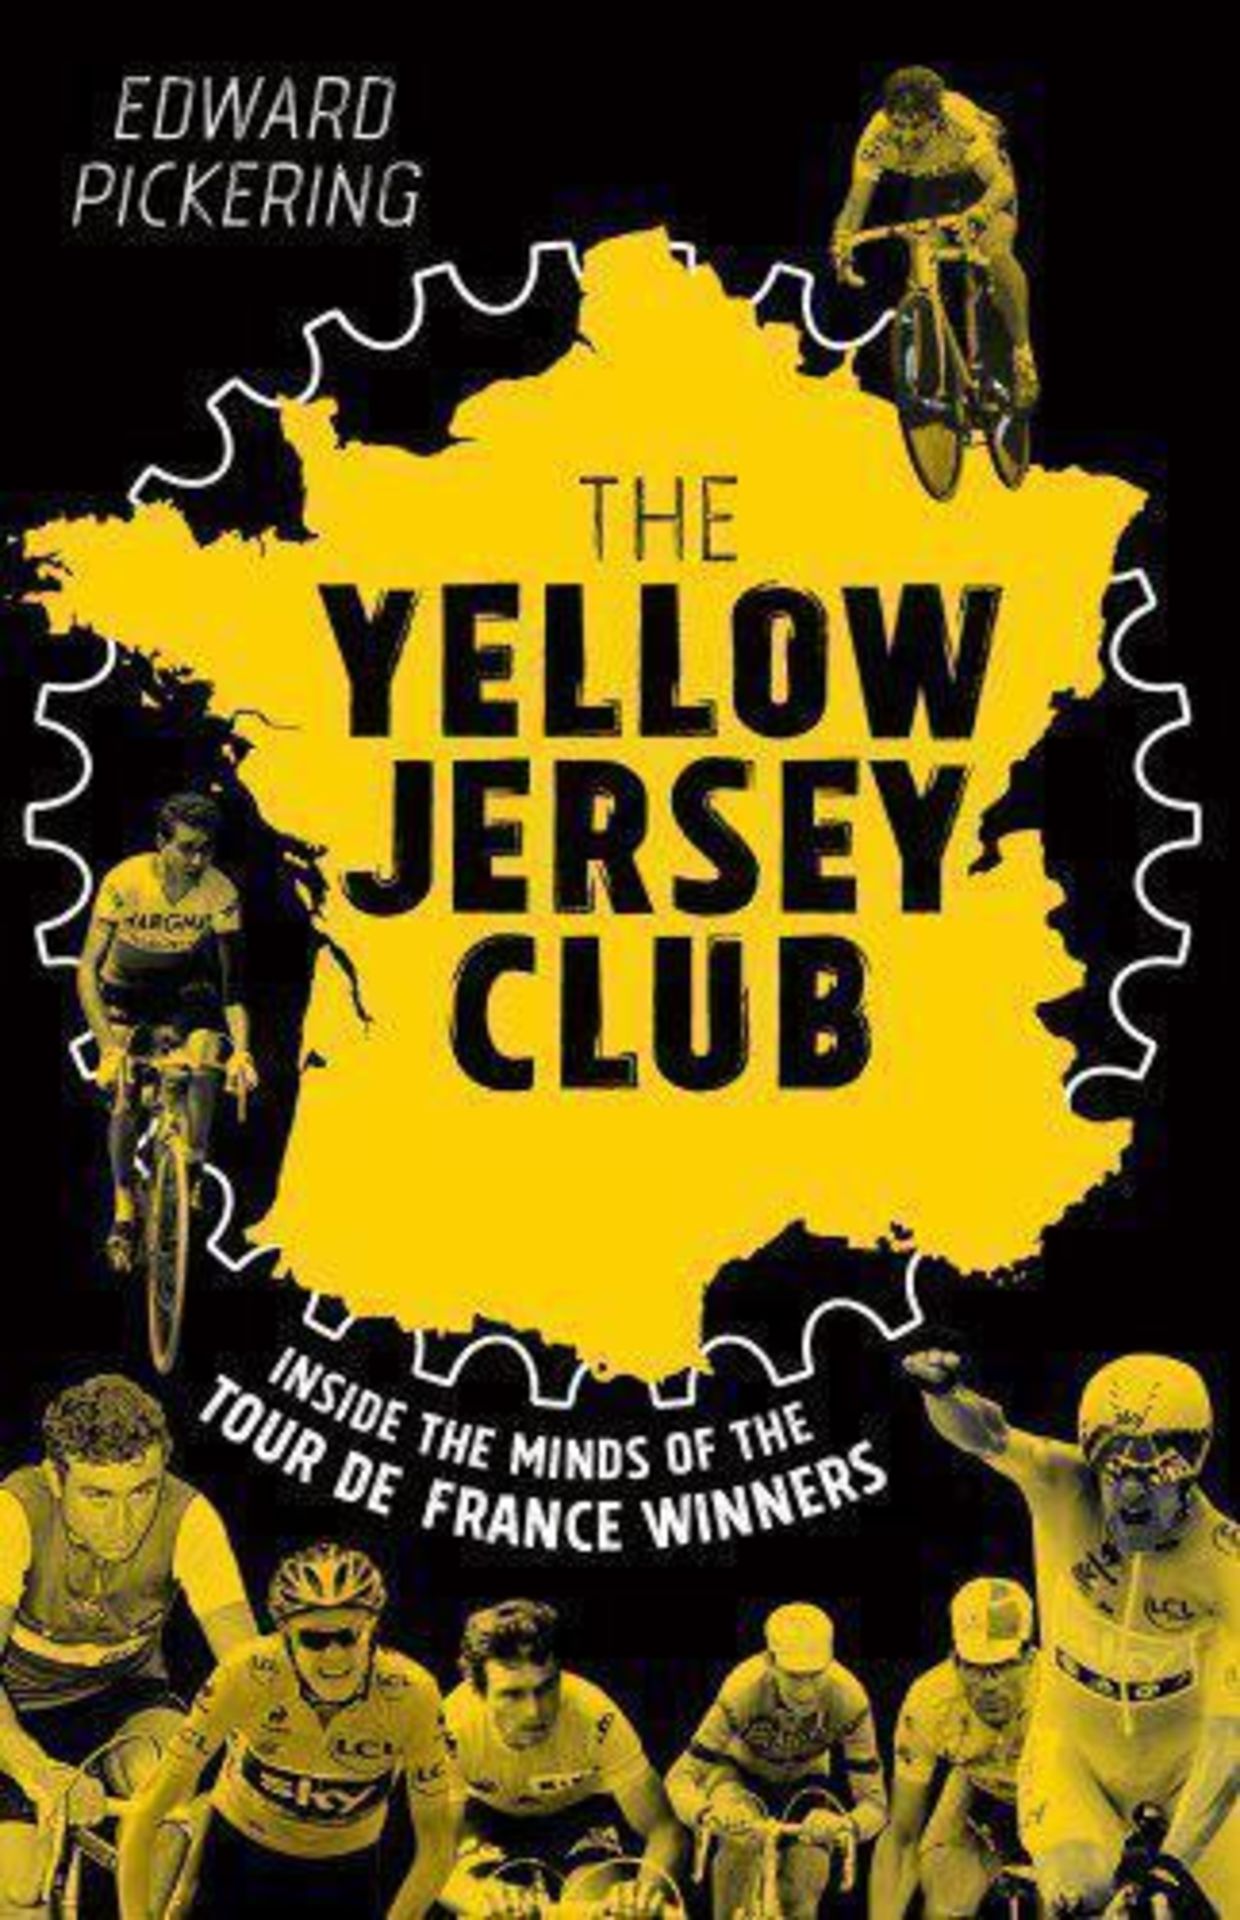 32 x Brand New The Yellow Jersey Club Hardcover Books by Edward Pickering